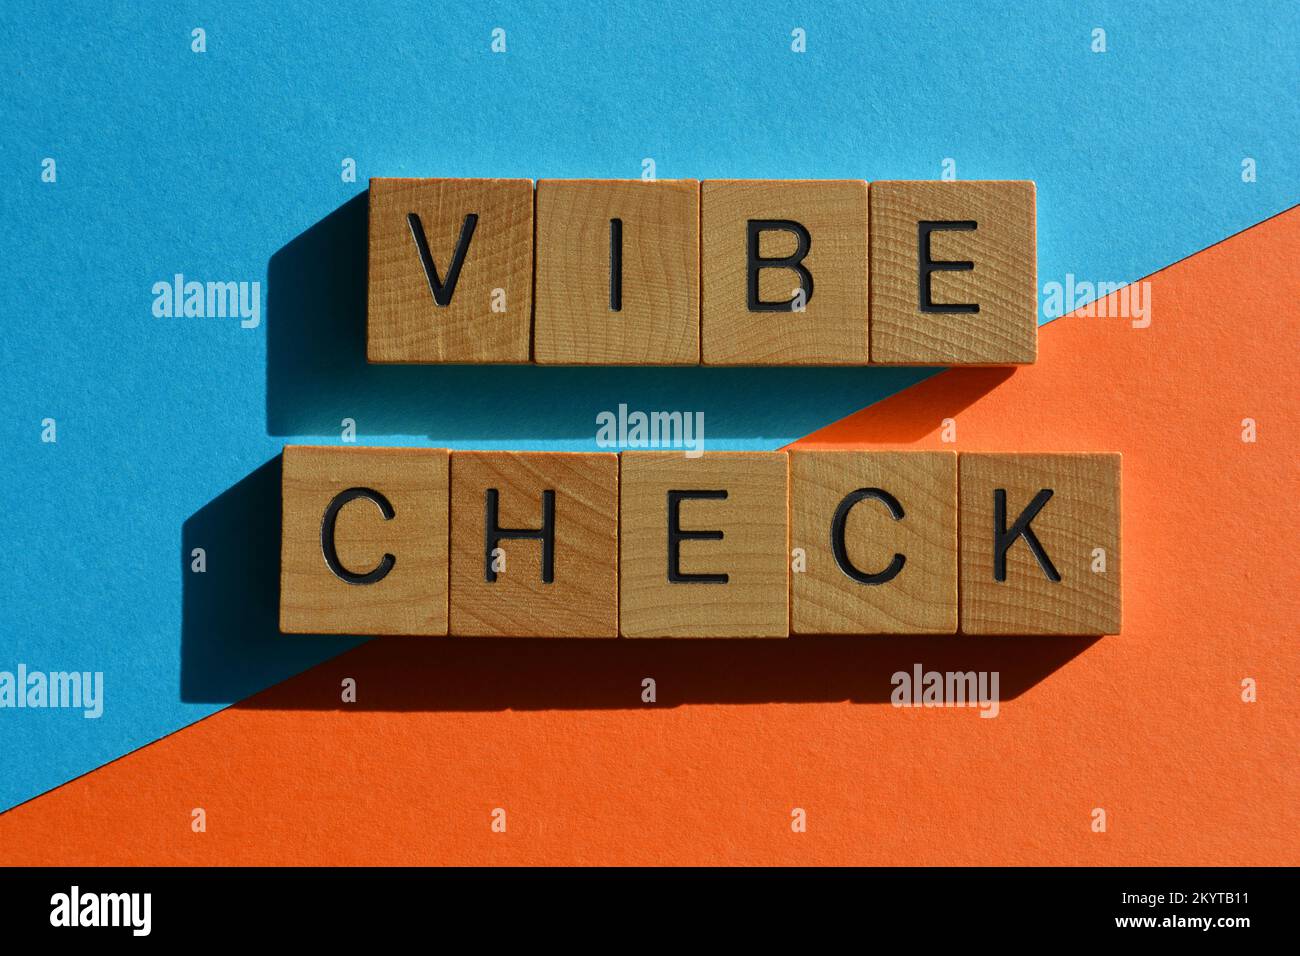 Vibe Check, Get Z buzzword meaning an evaluation of someones emotional state in wooden alphabet letters isolated on bright background Stock Photo